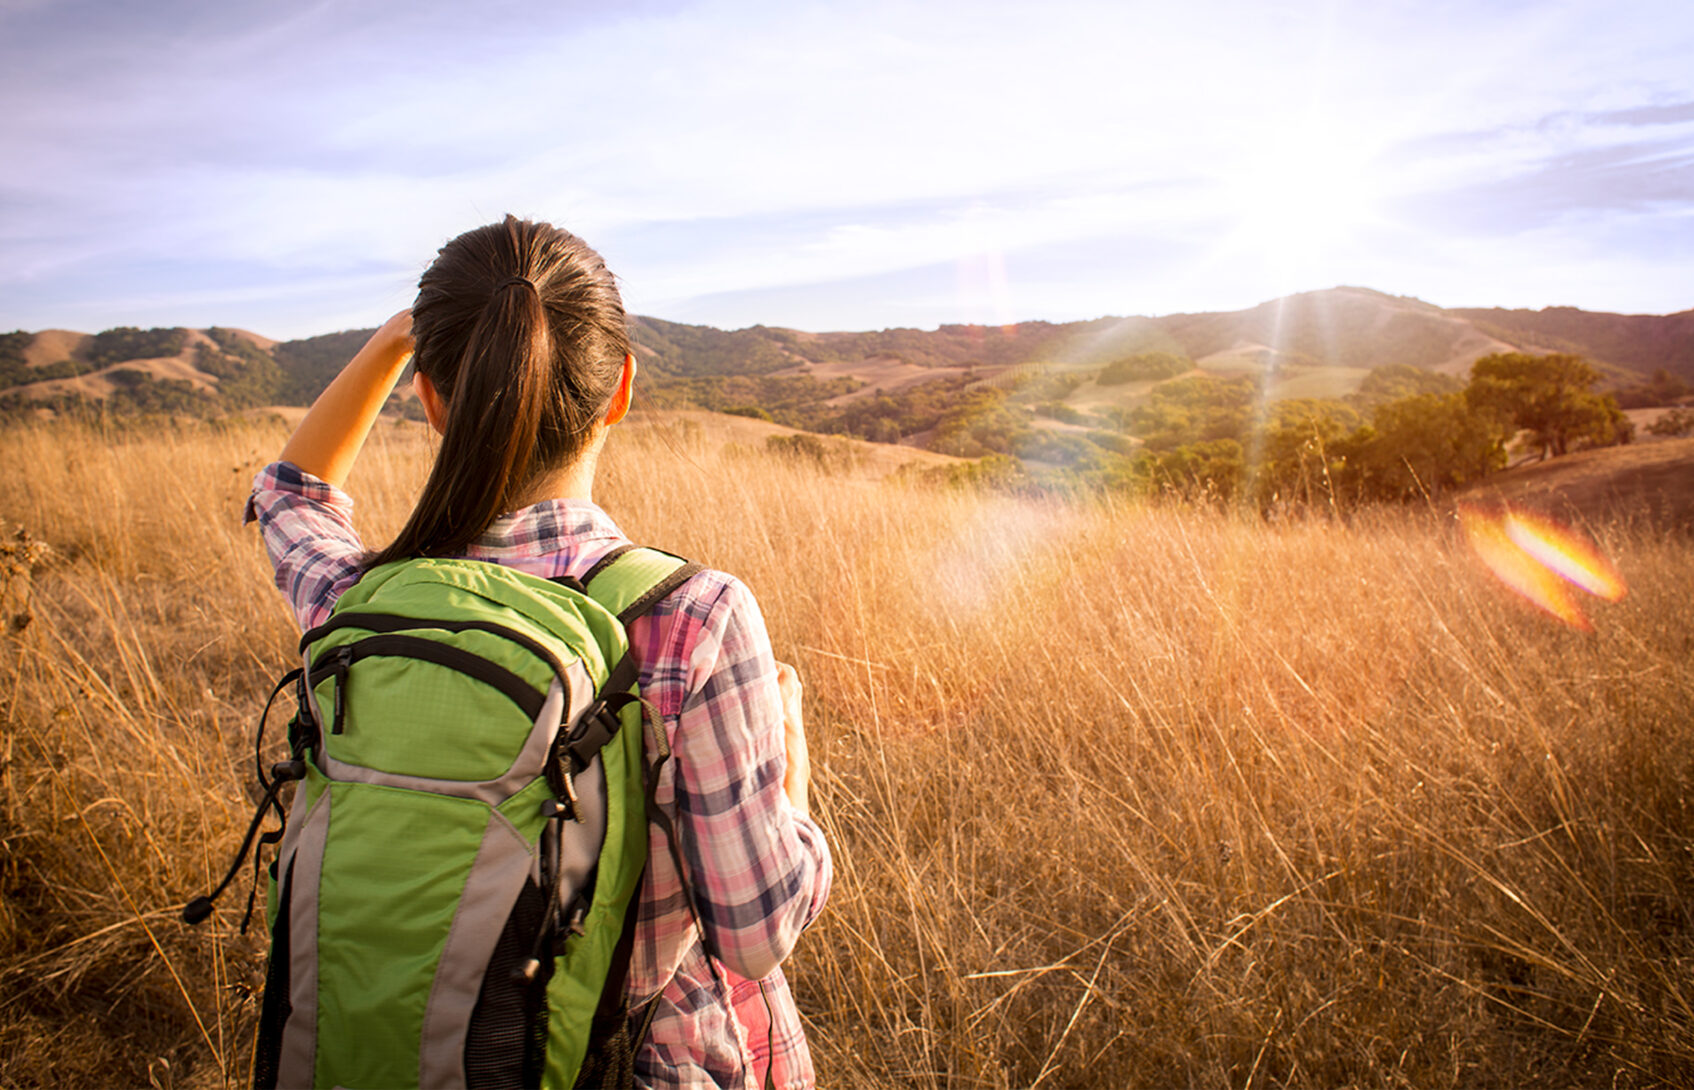 A woman wearing a backpack looks out over a field.